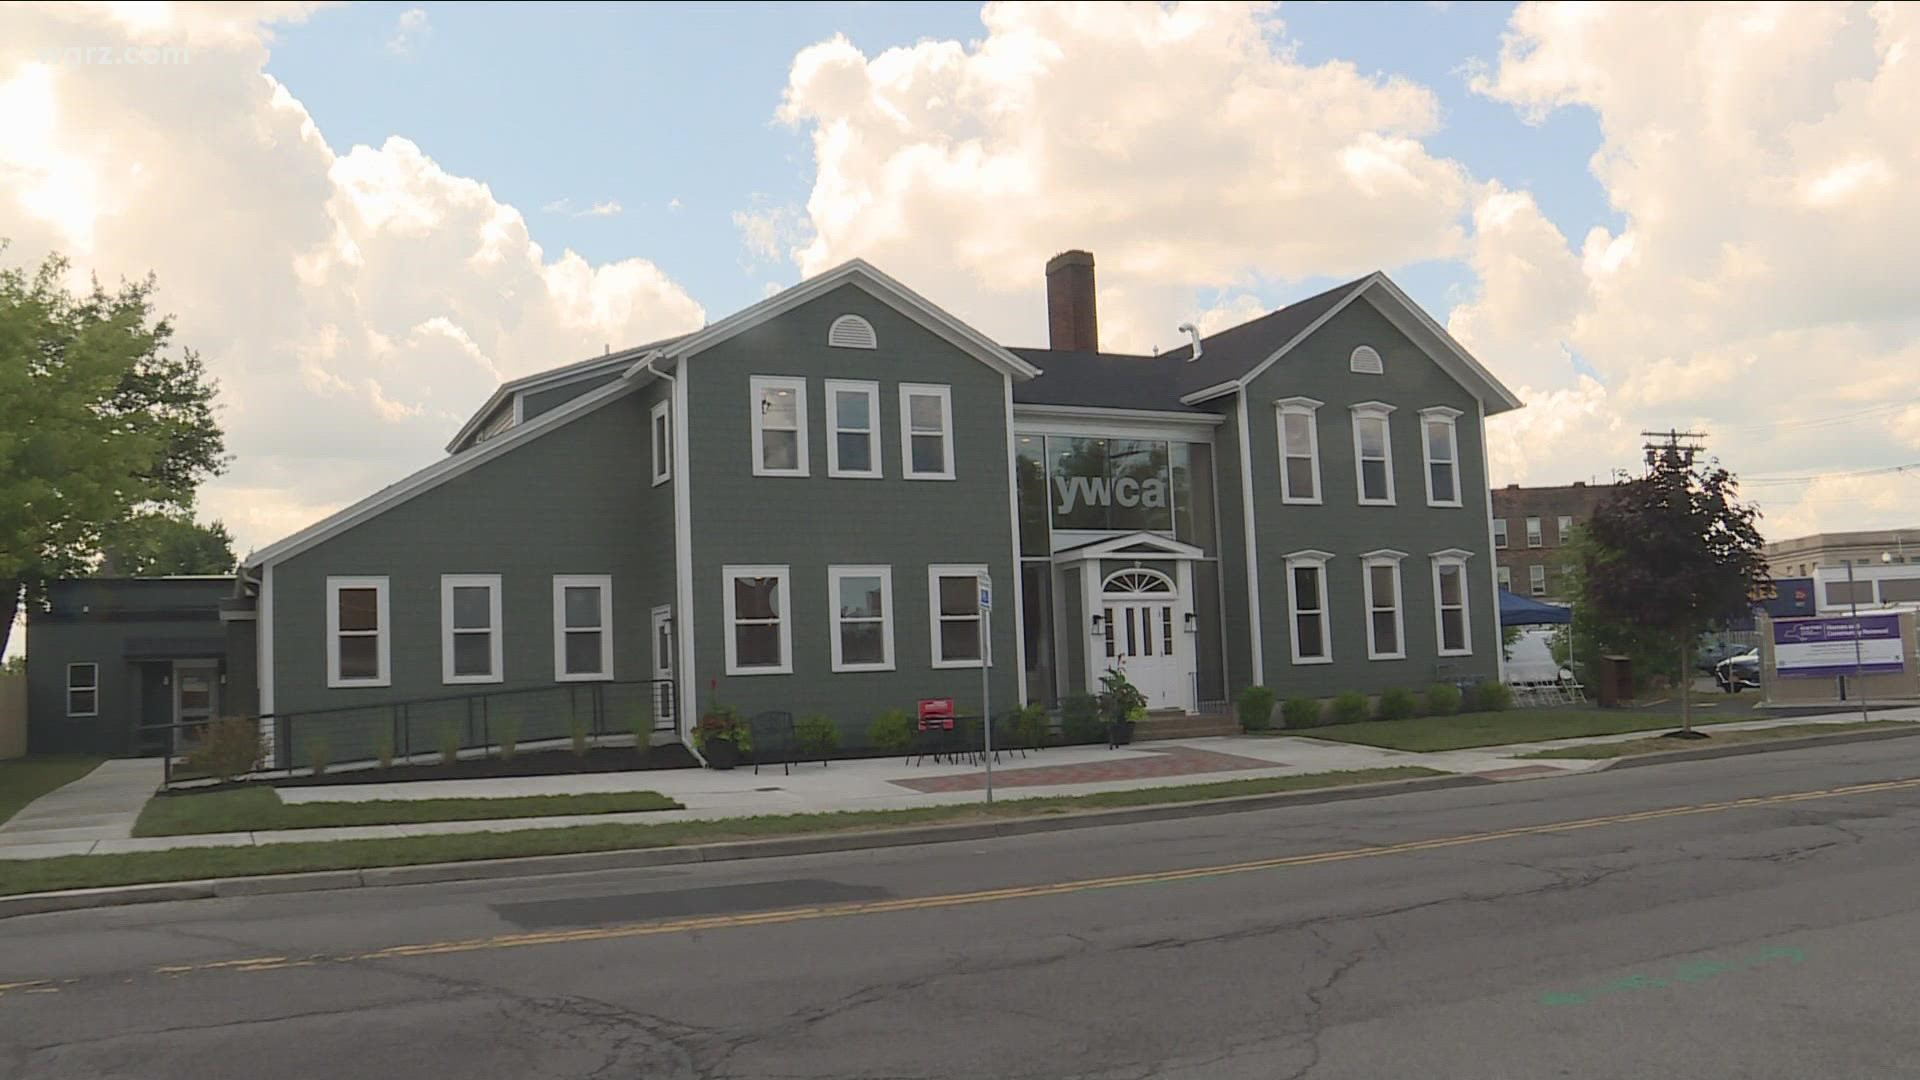 building is located at 49 Tremont Street in North Tonawanda.
The 12 studio apartments will serve women without children.